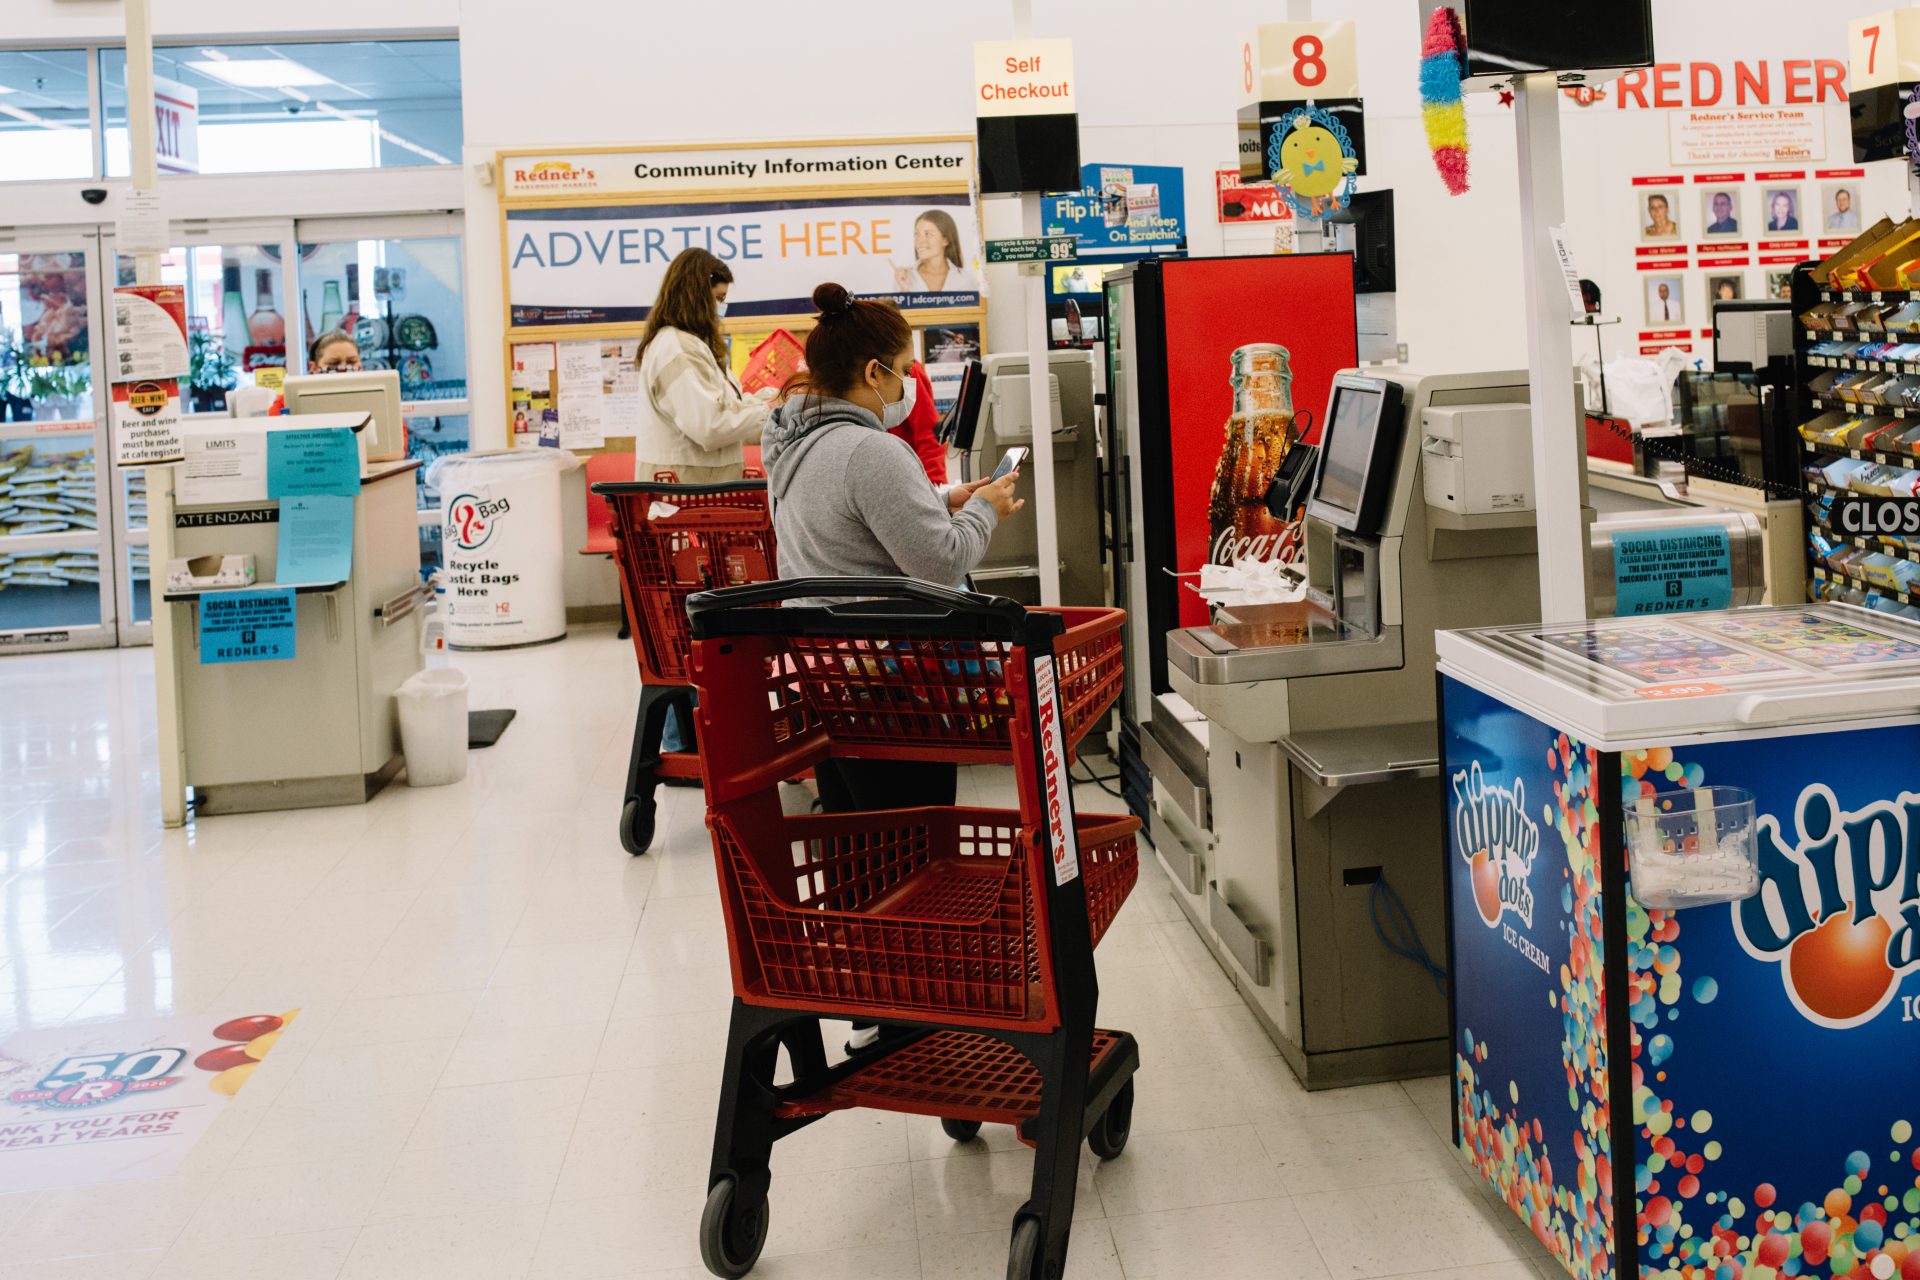 Shoppers wearing masks use the self check-out stations at a Redner's Warehouse Market on April 10, 2020.